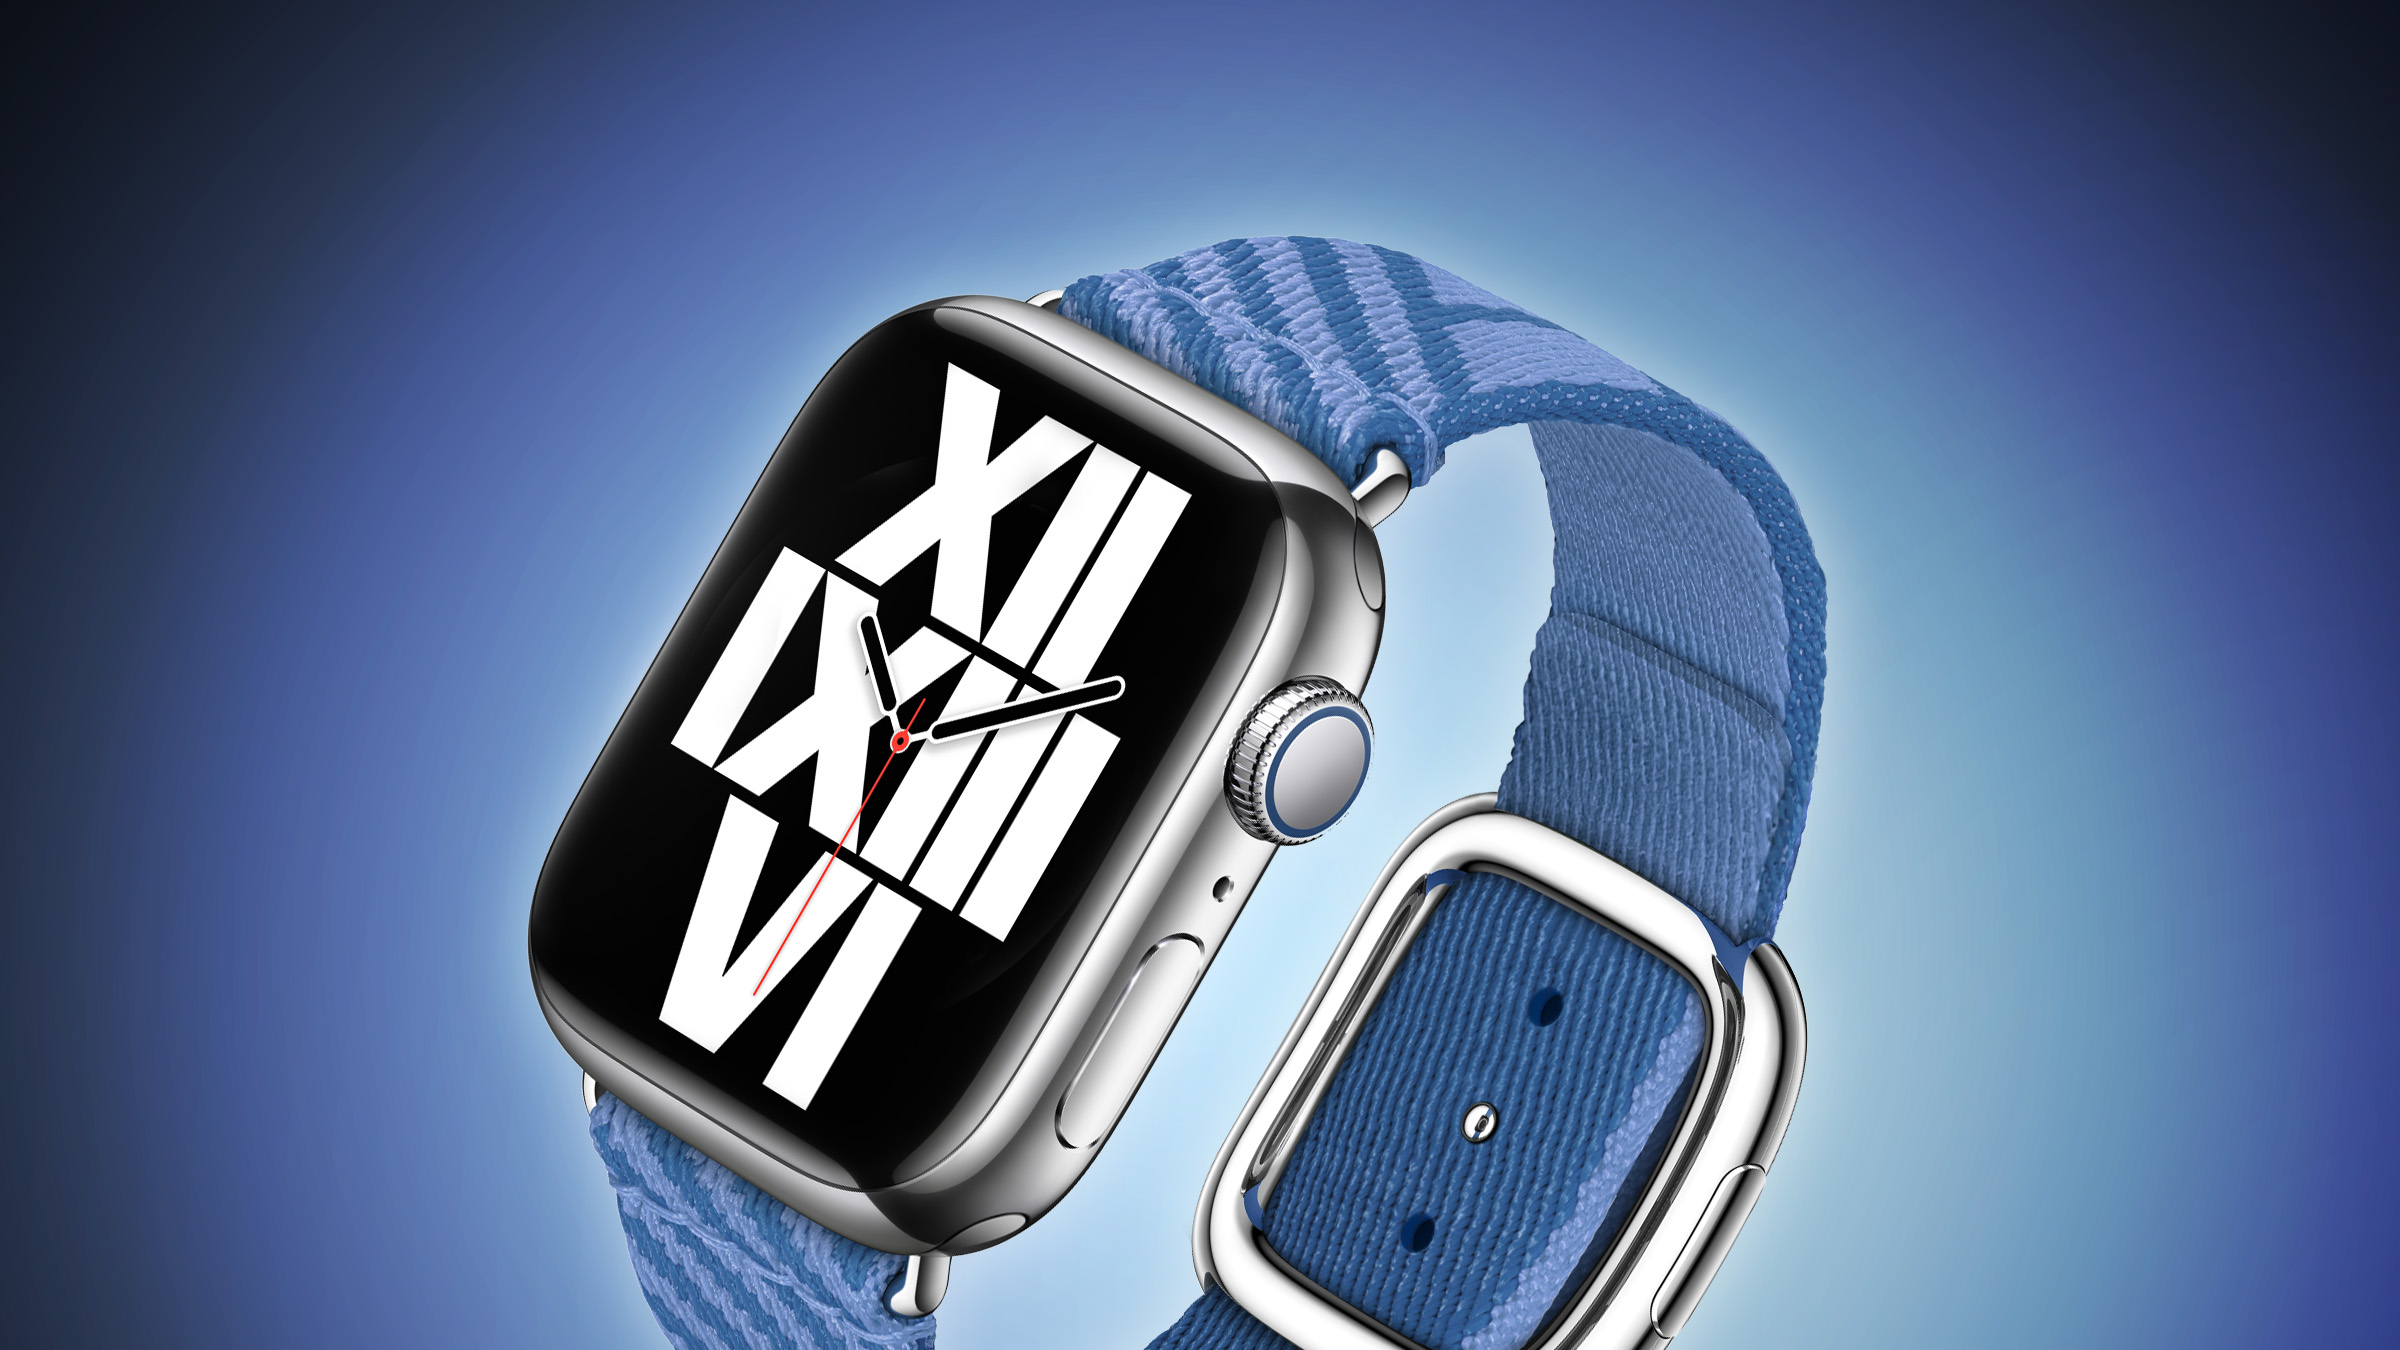 Upcoming Apple Watch Models Could Get New Magnetic Band Option ...